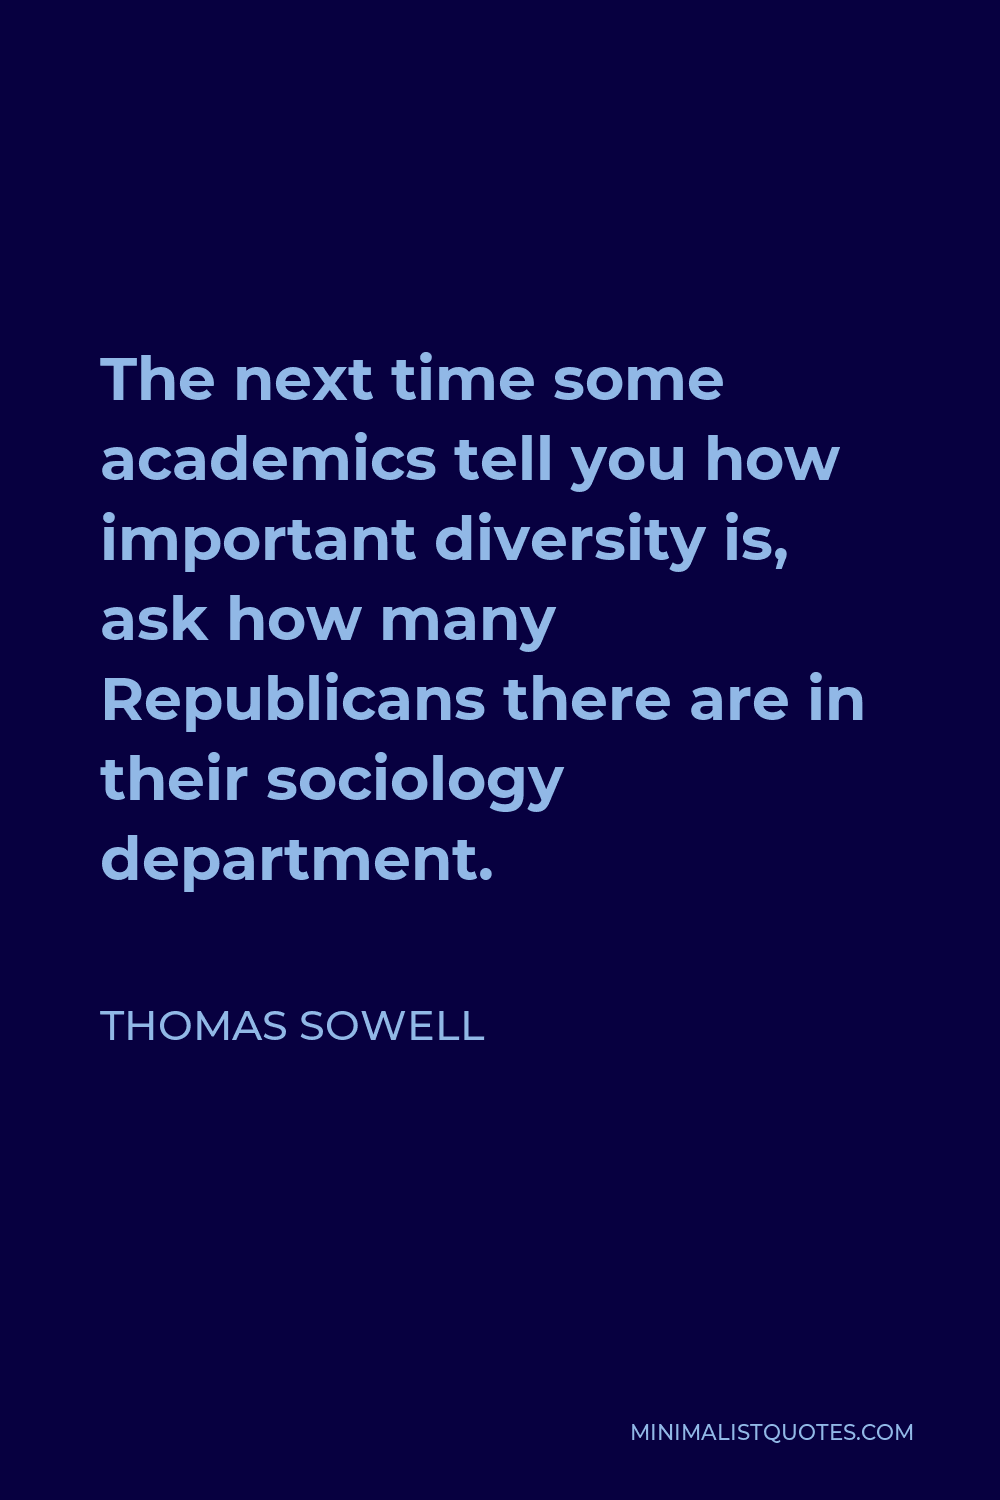 Thomas Sowell Quote - The next time some academics tell you how important diversity is, ask how many Republicans there are in their sociology department.